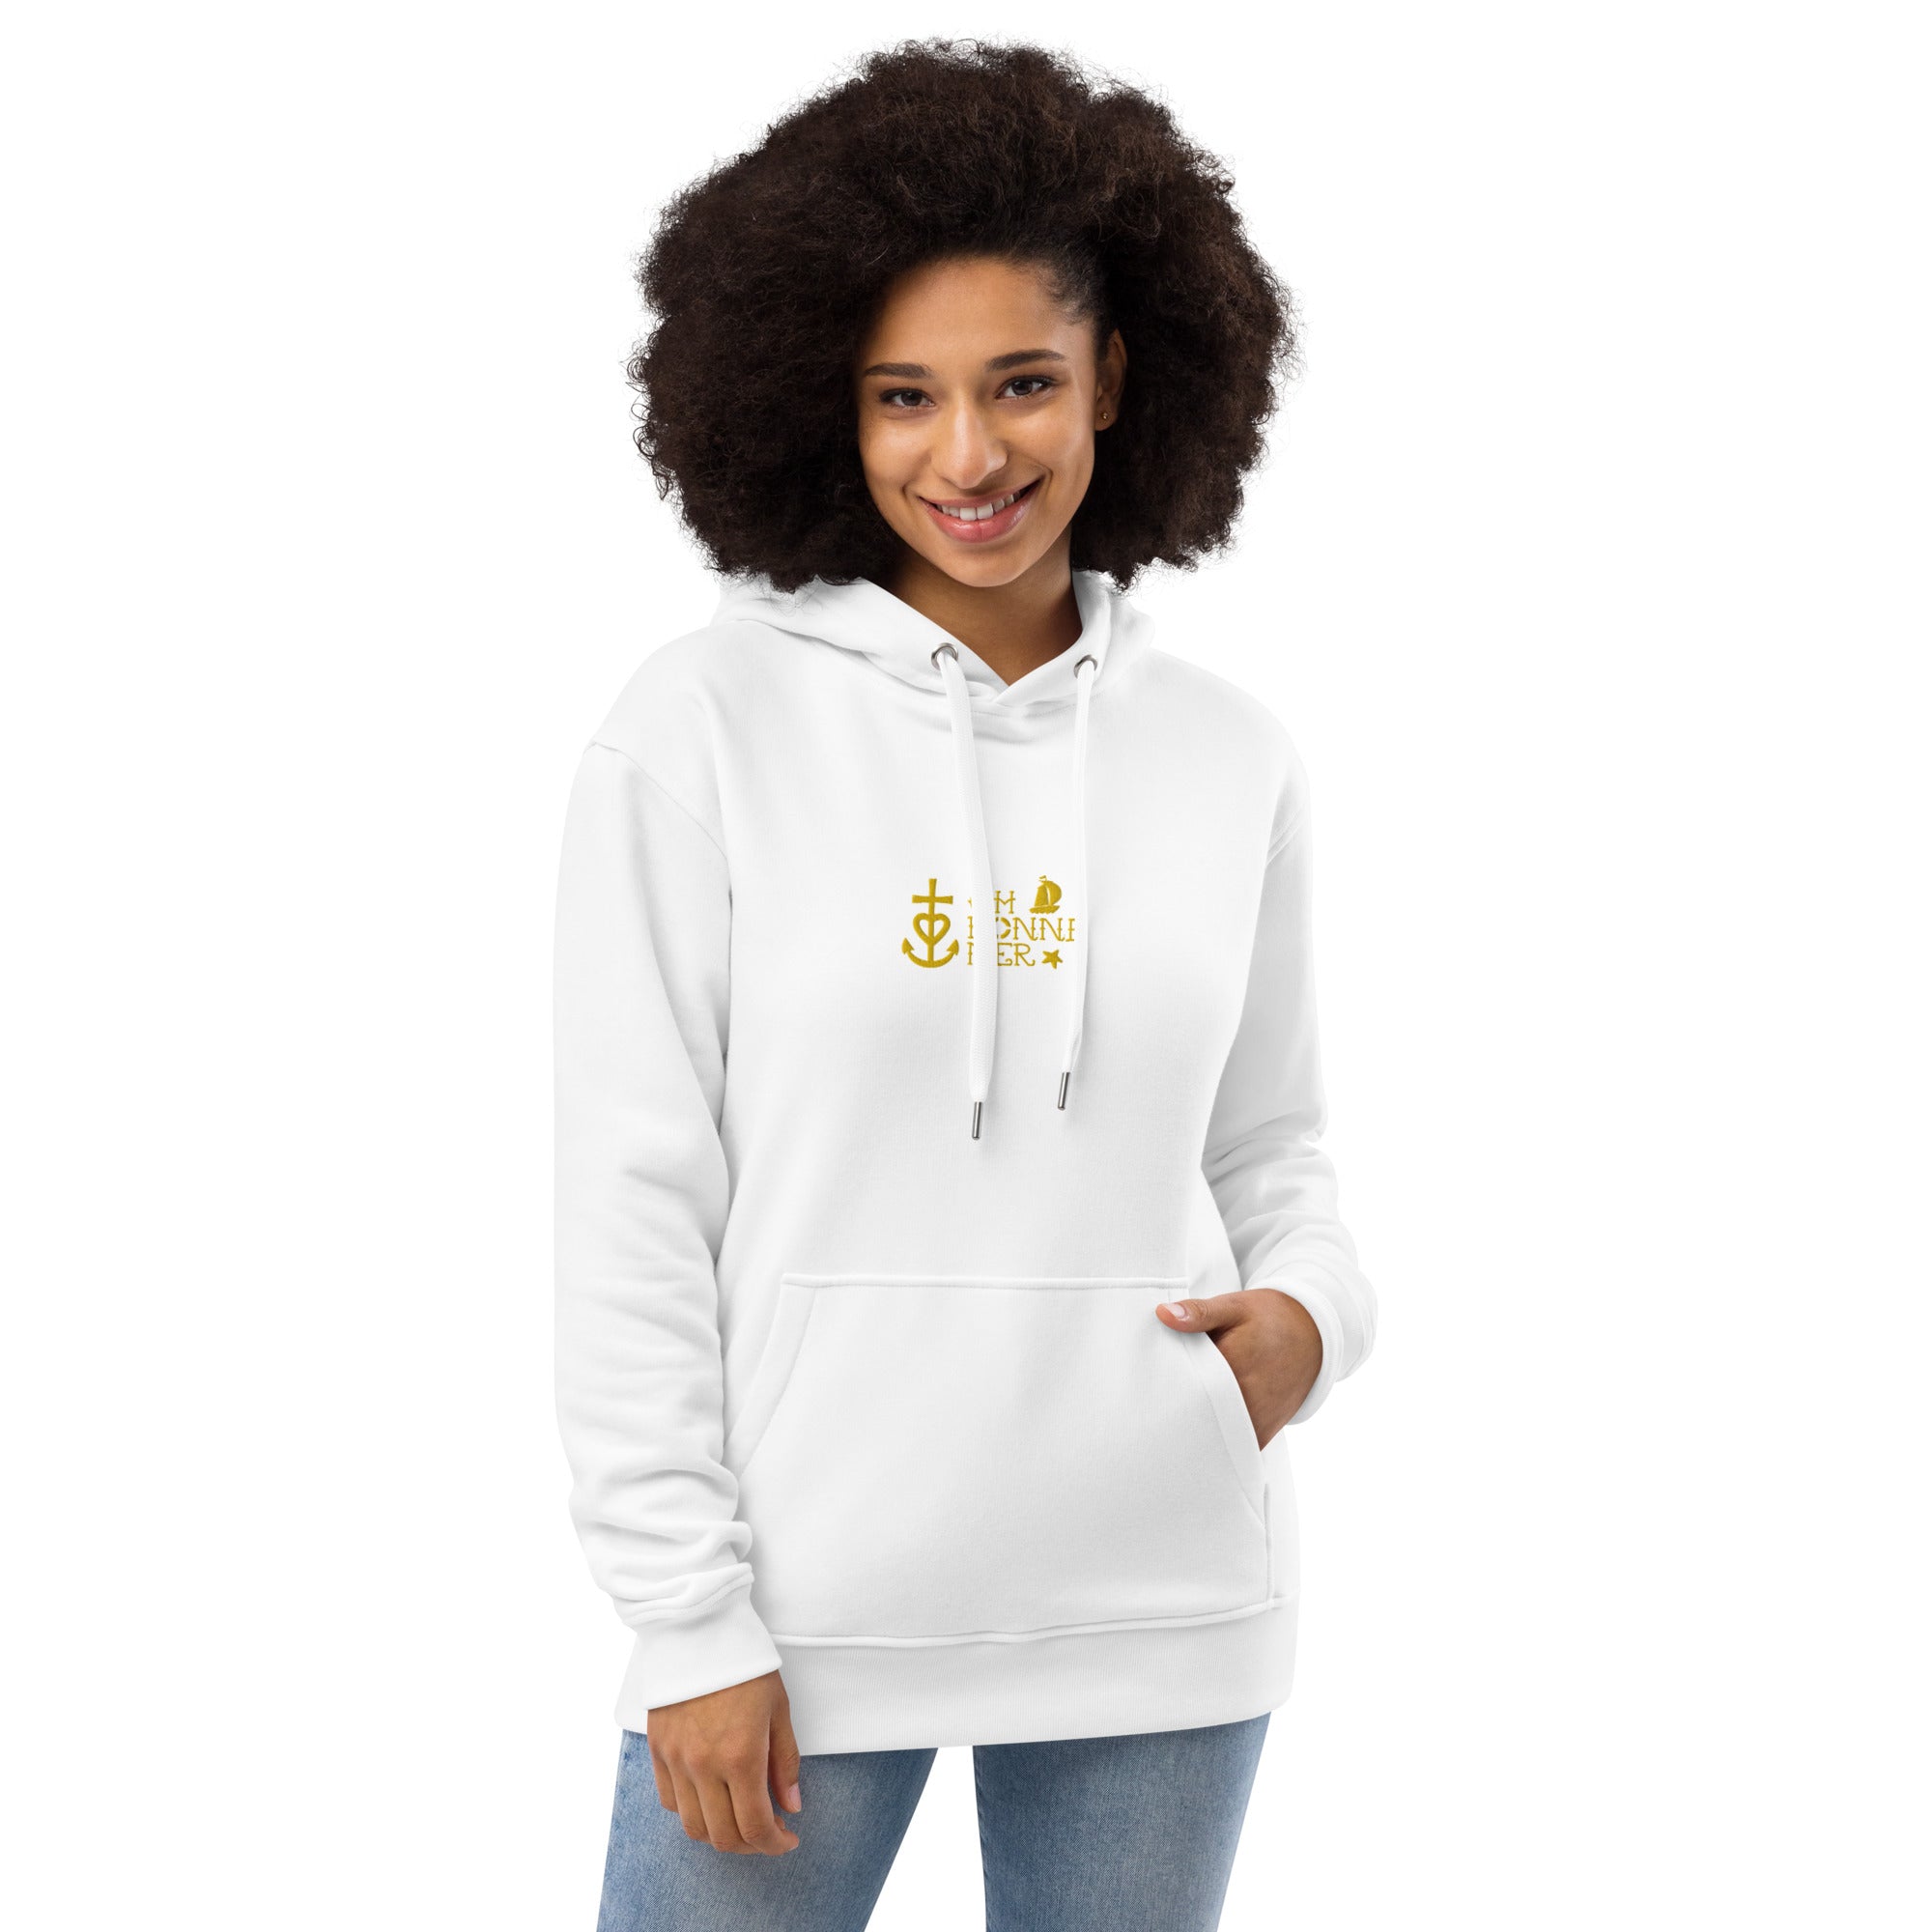 Premium eco hoodie Oh Bonne Mer 2 small embroided pattern on front